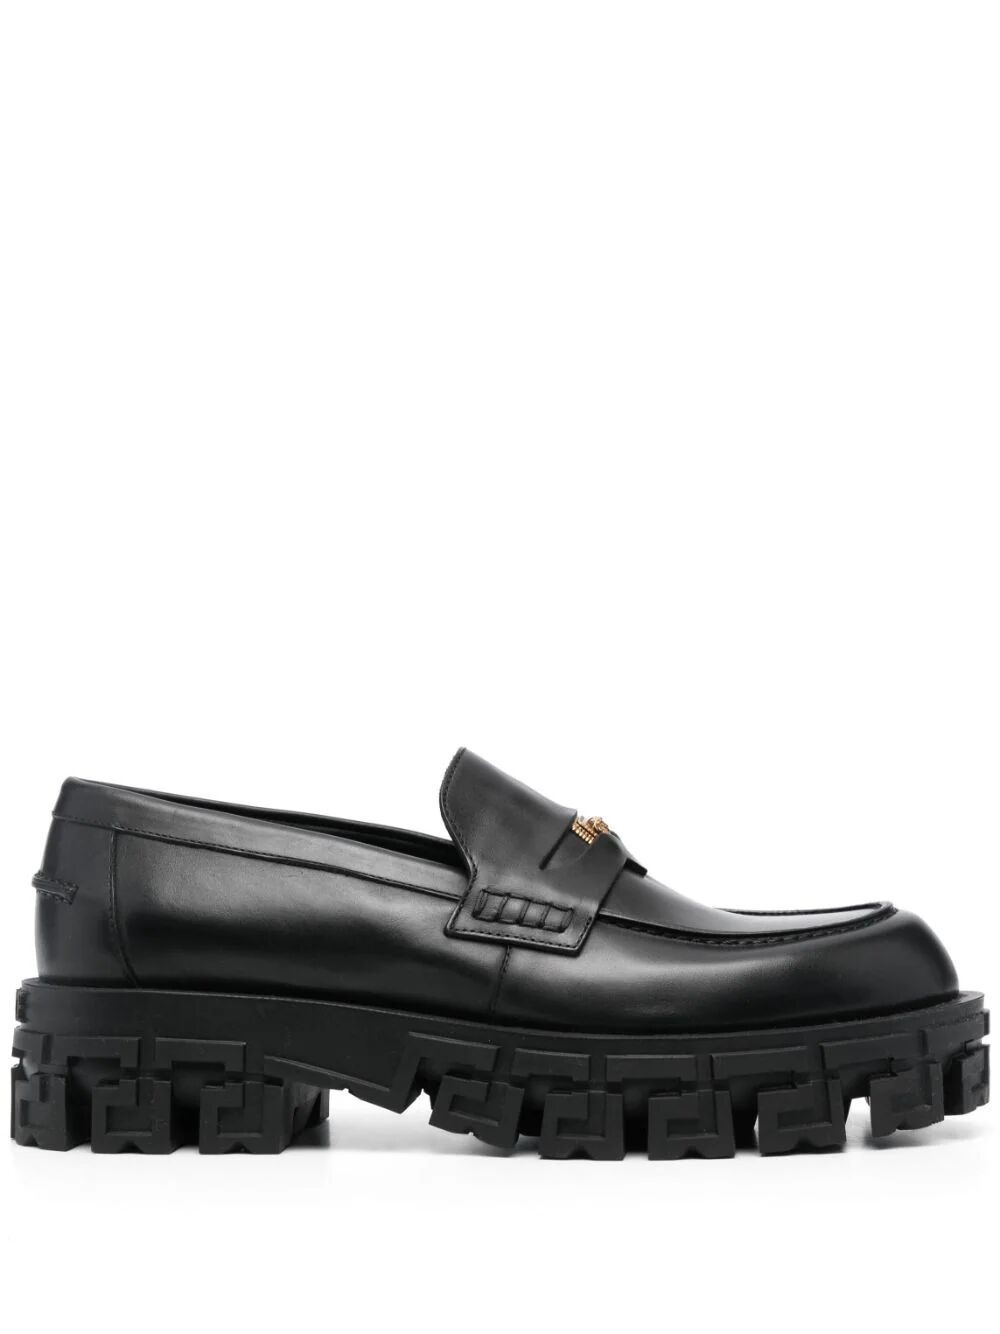 LOAFER CALF LEATHER - 1